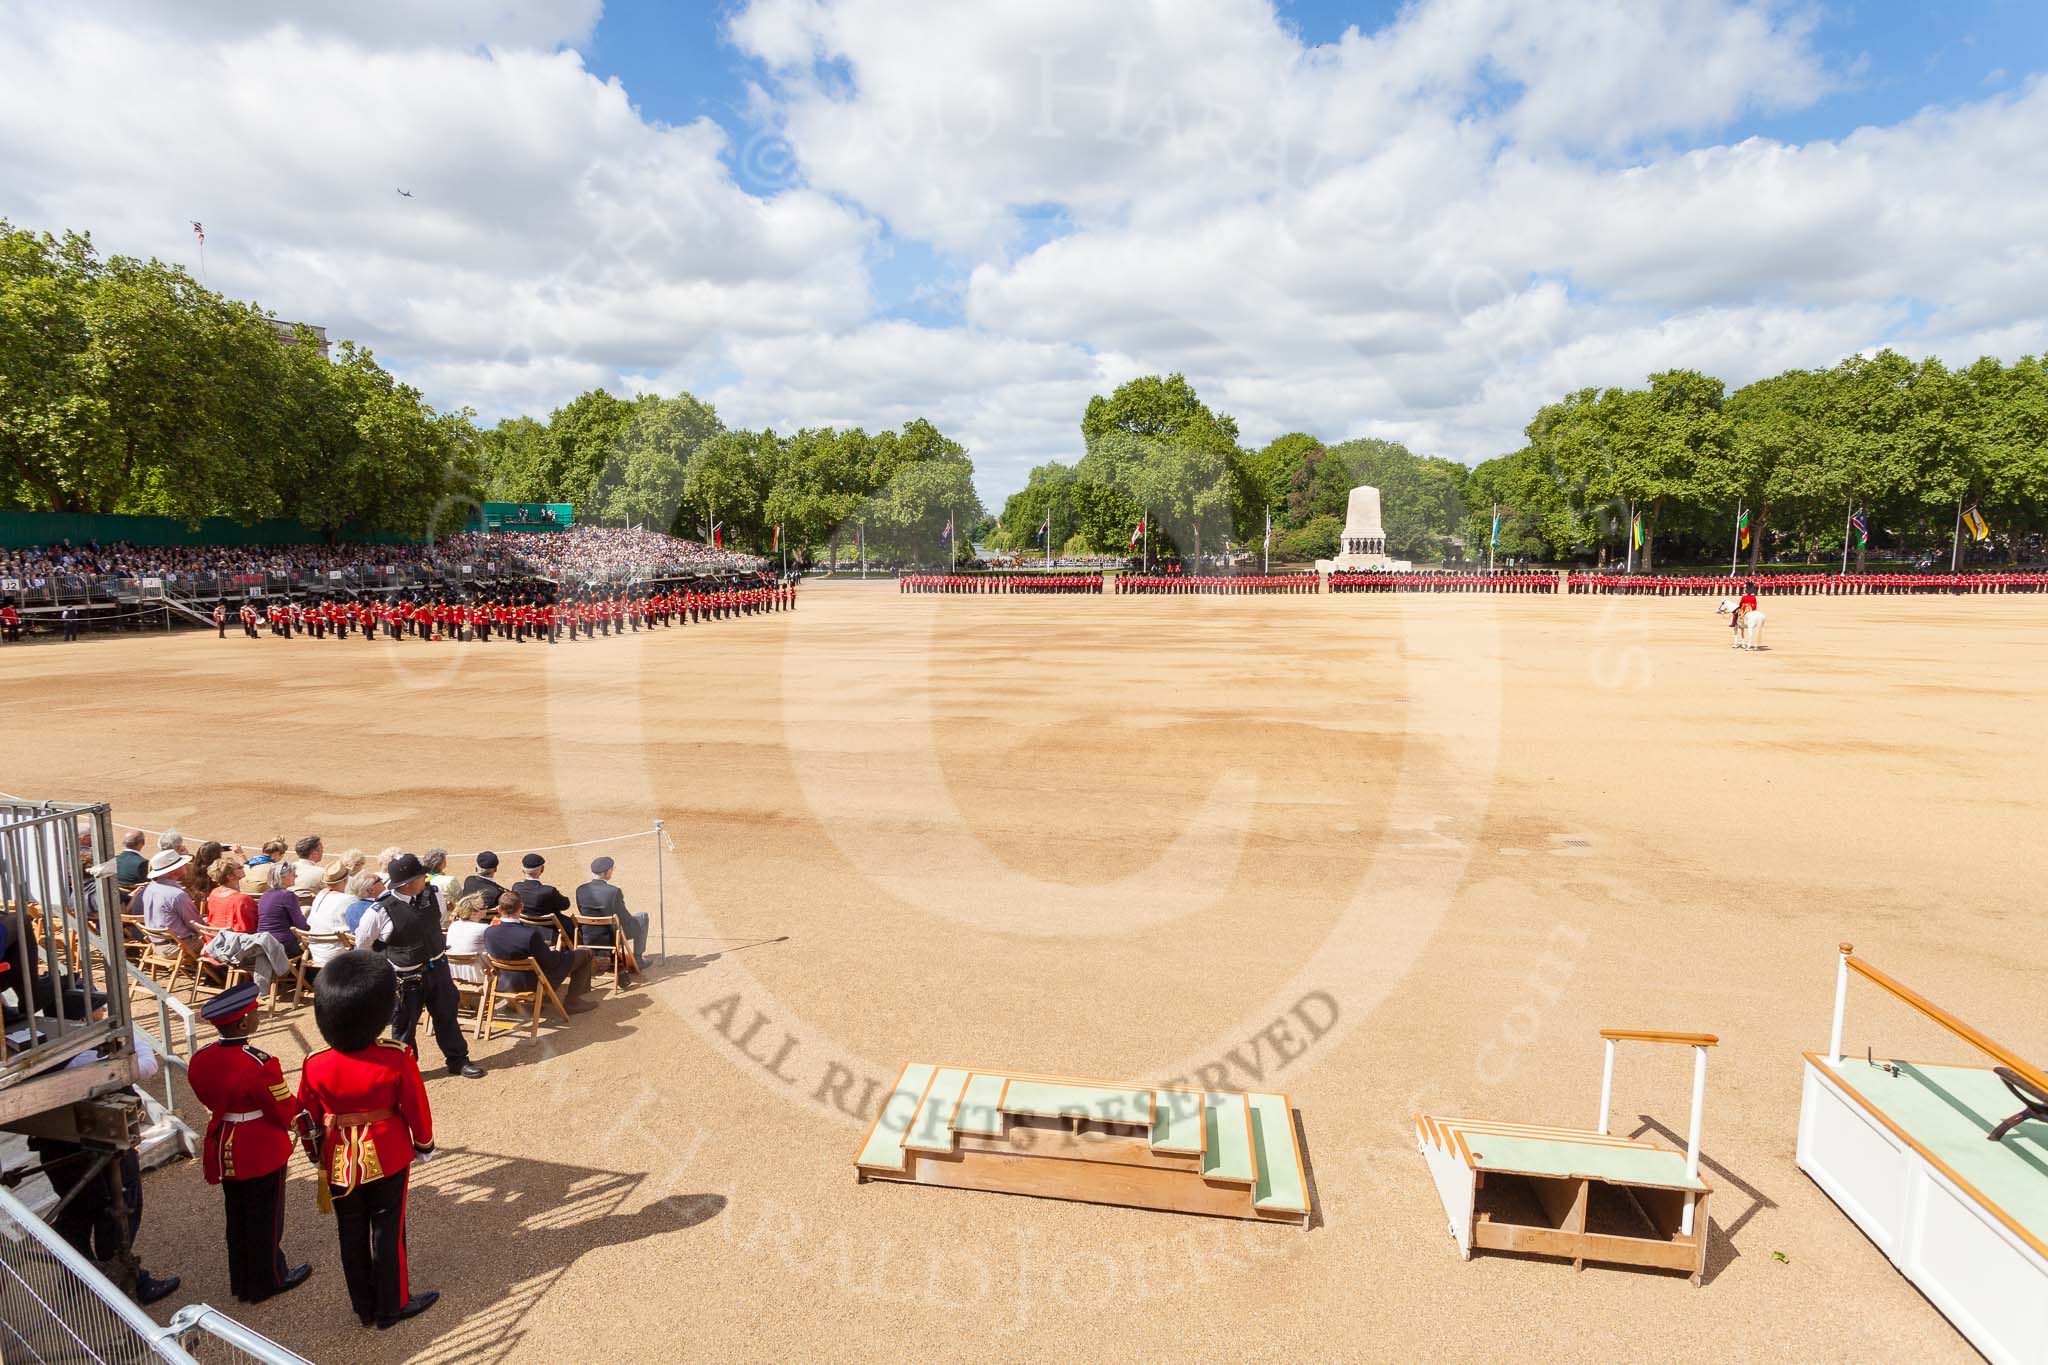 The Colonel's Review 2015.
Horse Guards Parade, Westminster,
London,

United Kingdom,
on 06 June 2015 at 10:36, image #116